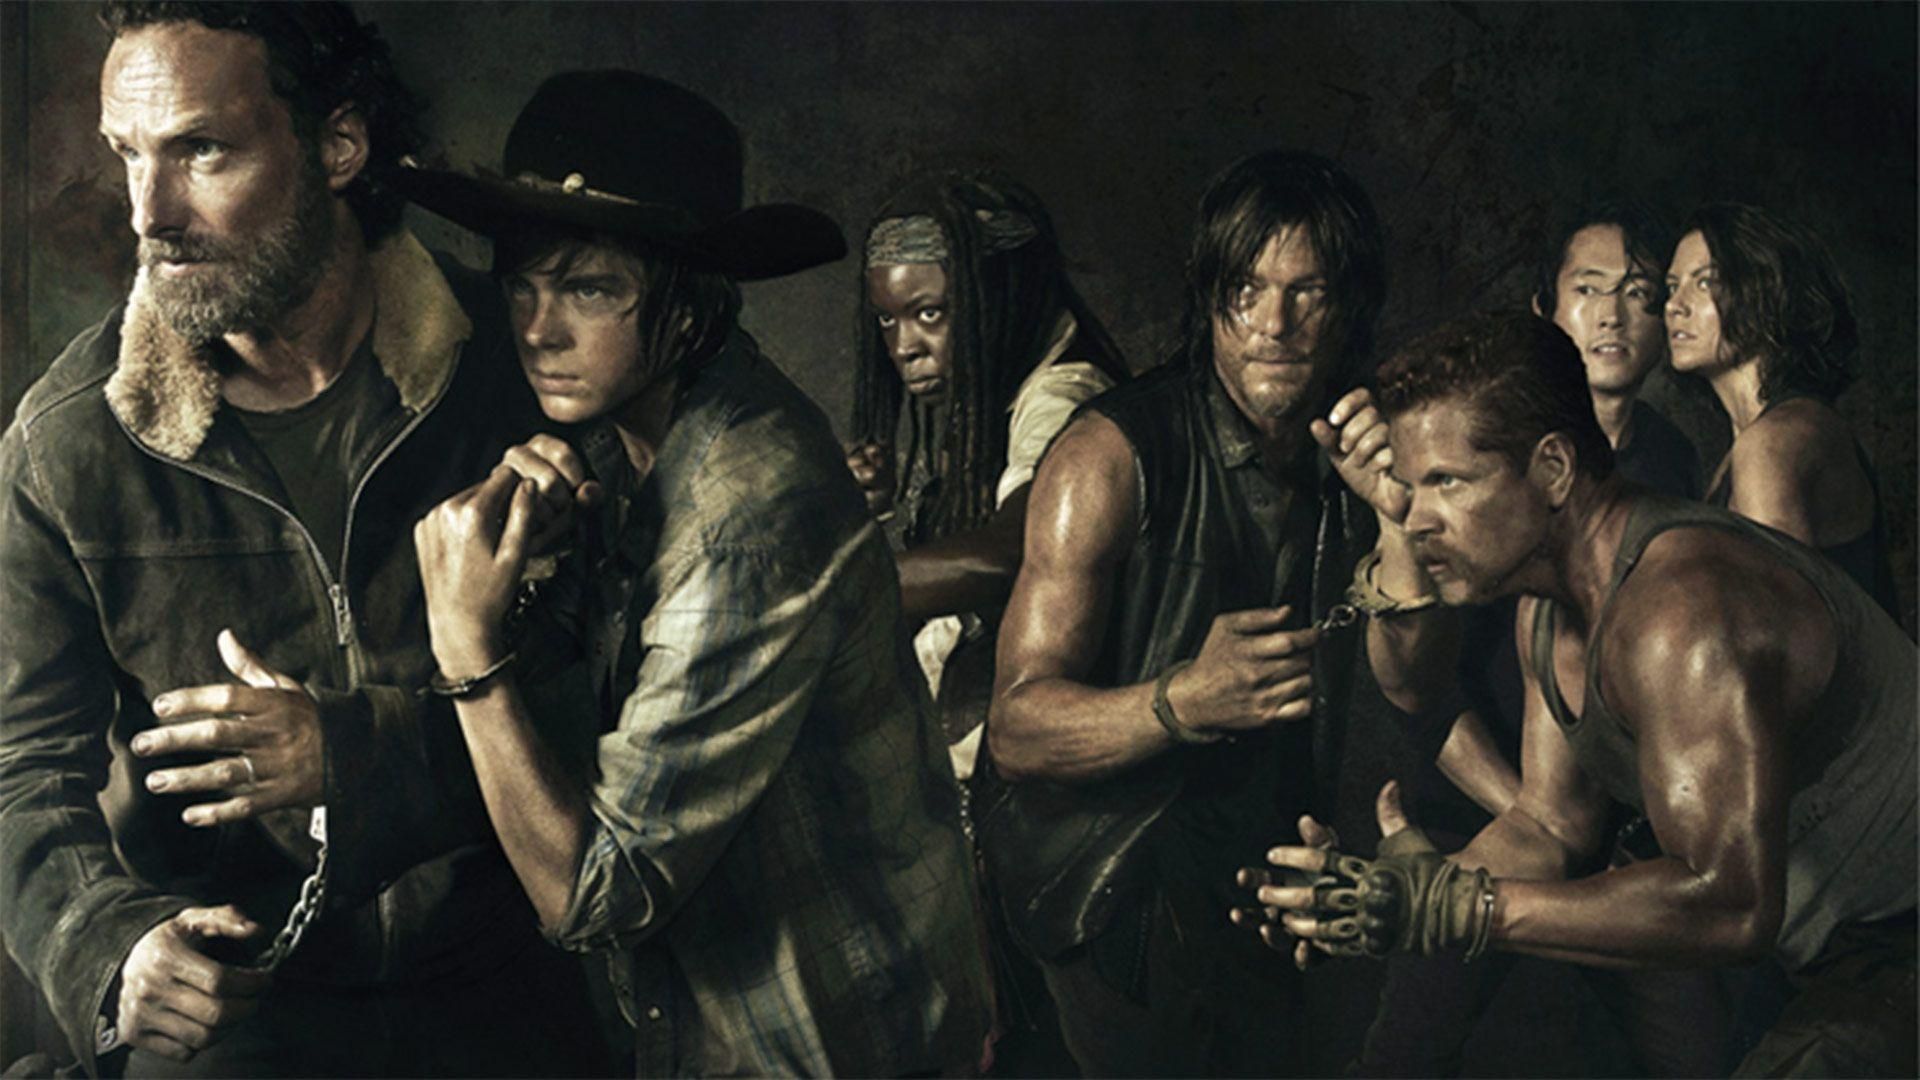 The last teaser for this new season suggests a new supply team composed of Rick and Daryl. Image Source: AMC